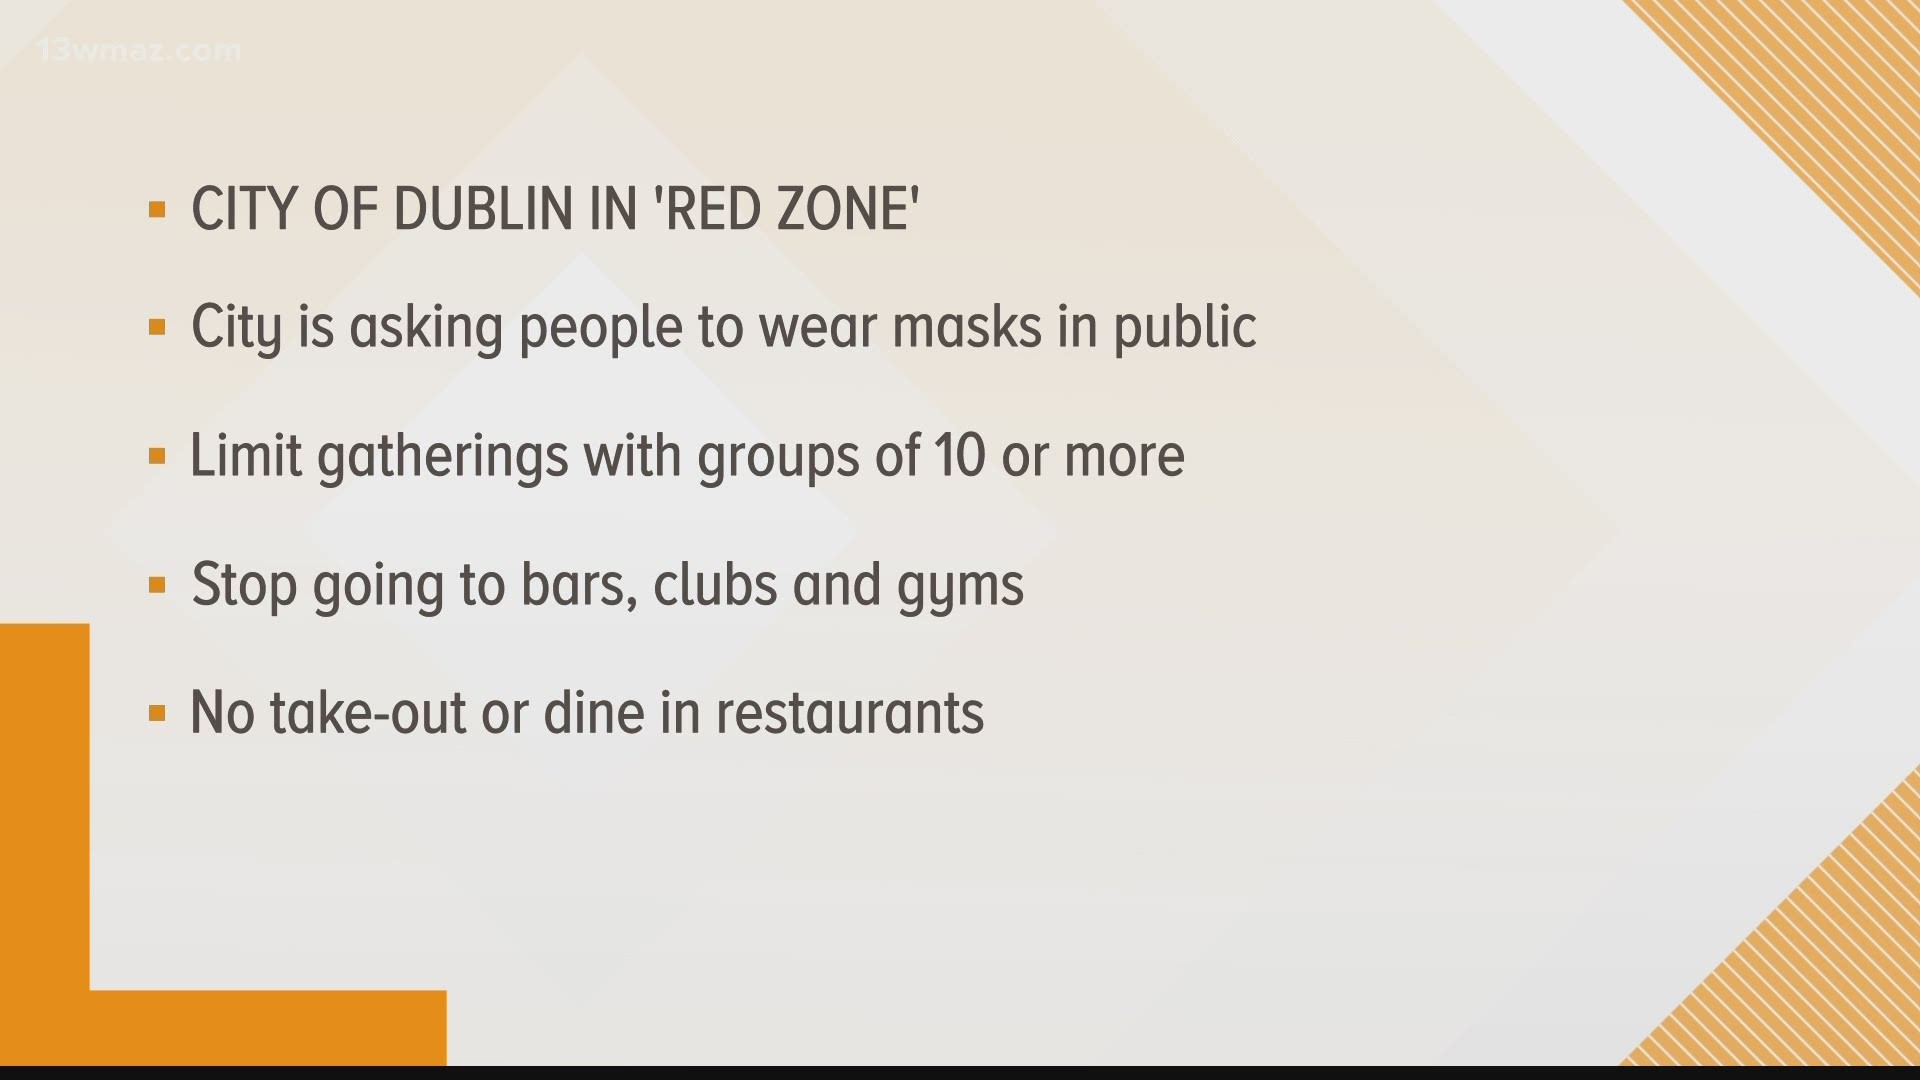 The City of Dublin posted a notice on Facebook saying it has now been marked in the 'red zone.'